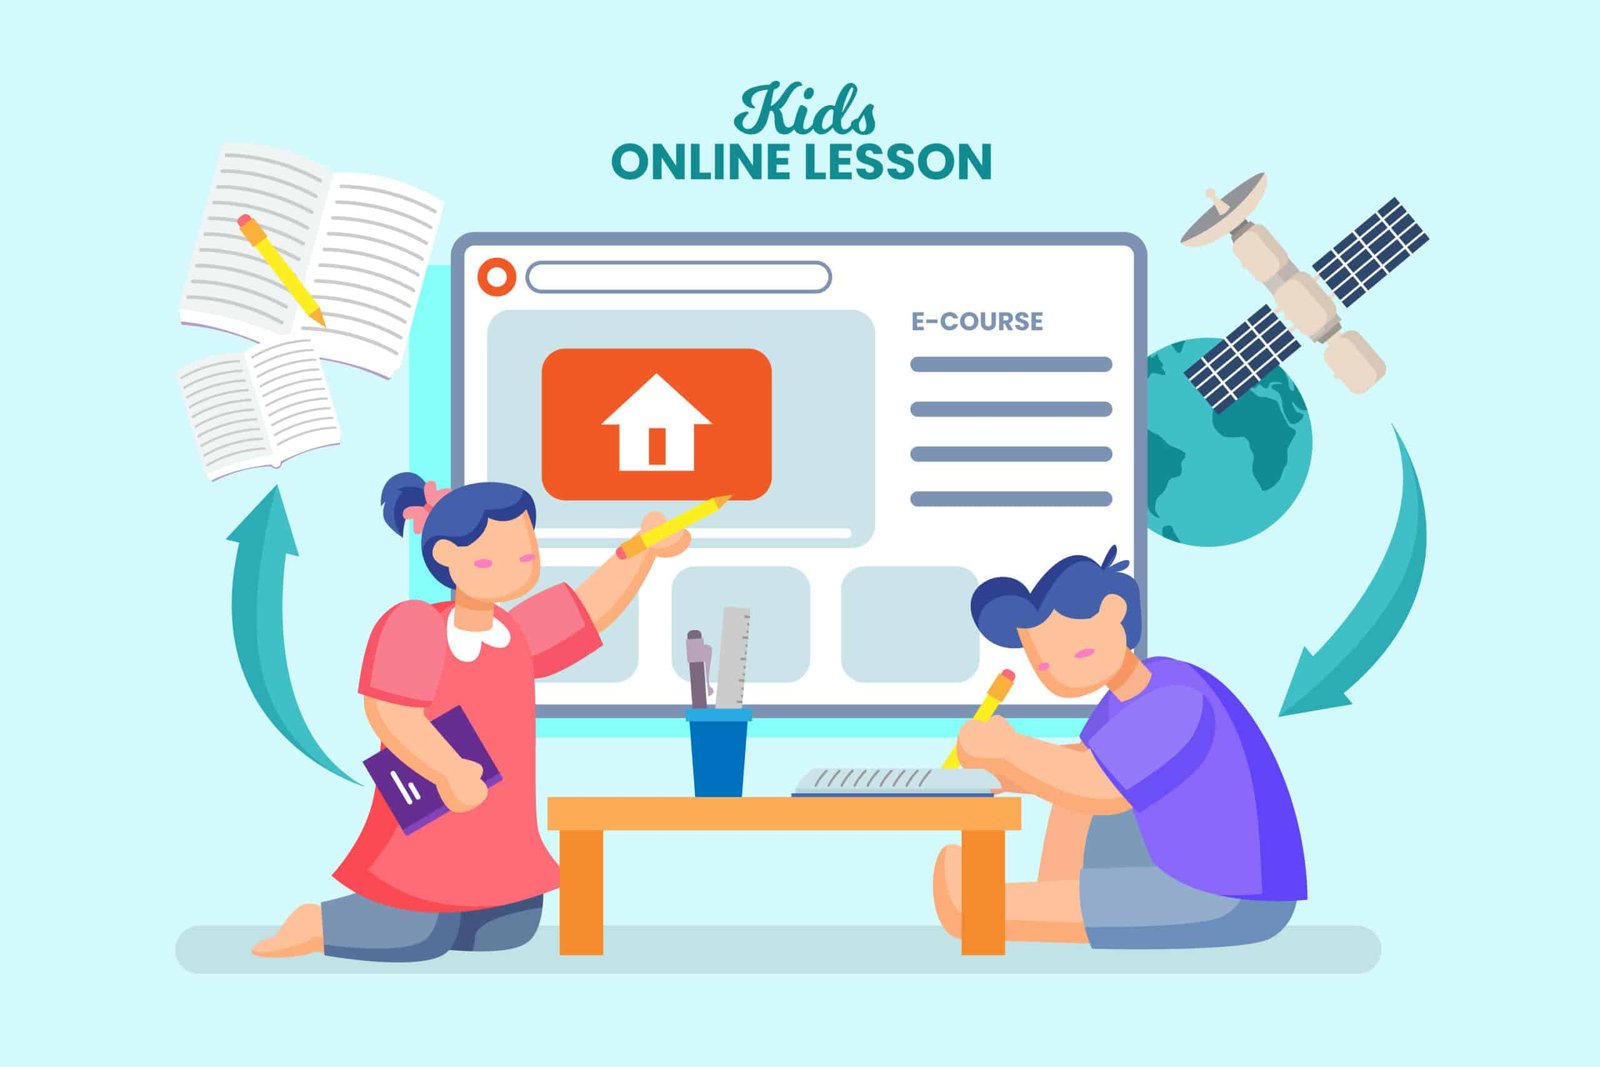 Learn New Skills Conveniently With Skillshare’s Online Learning Platform